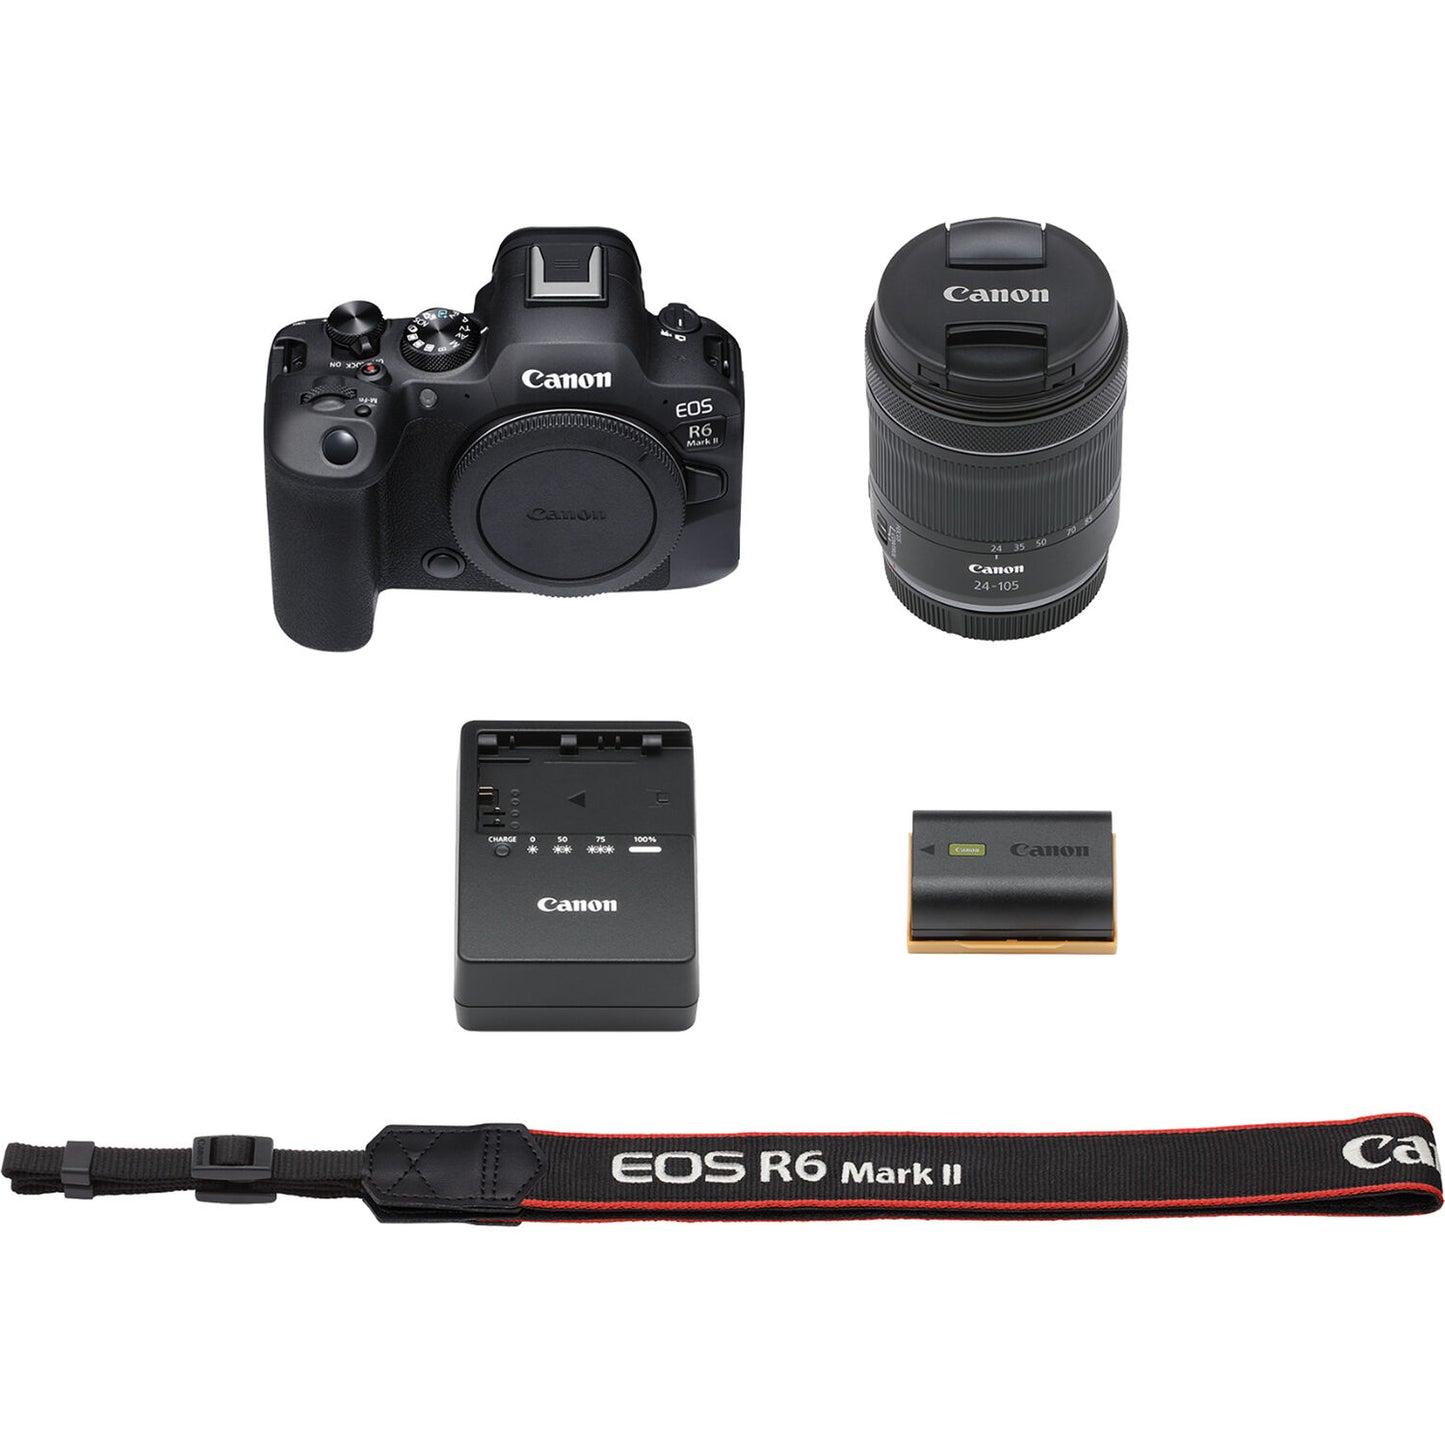 Canon EOS R6 Mark II Mirrorless Camera and 24-105mm f/4-7.1 Lens - 5666C018